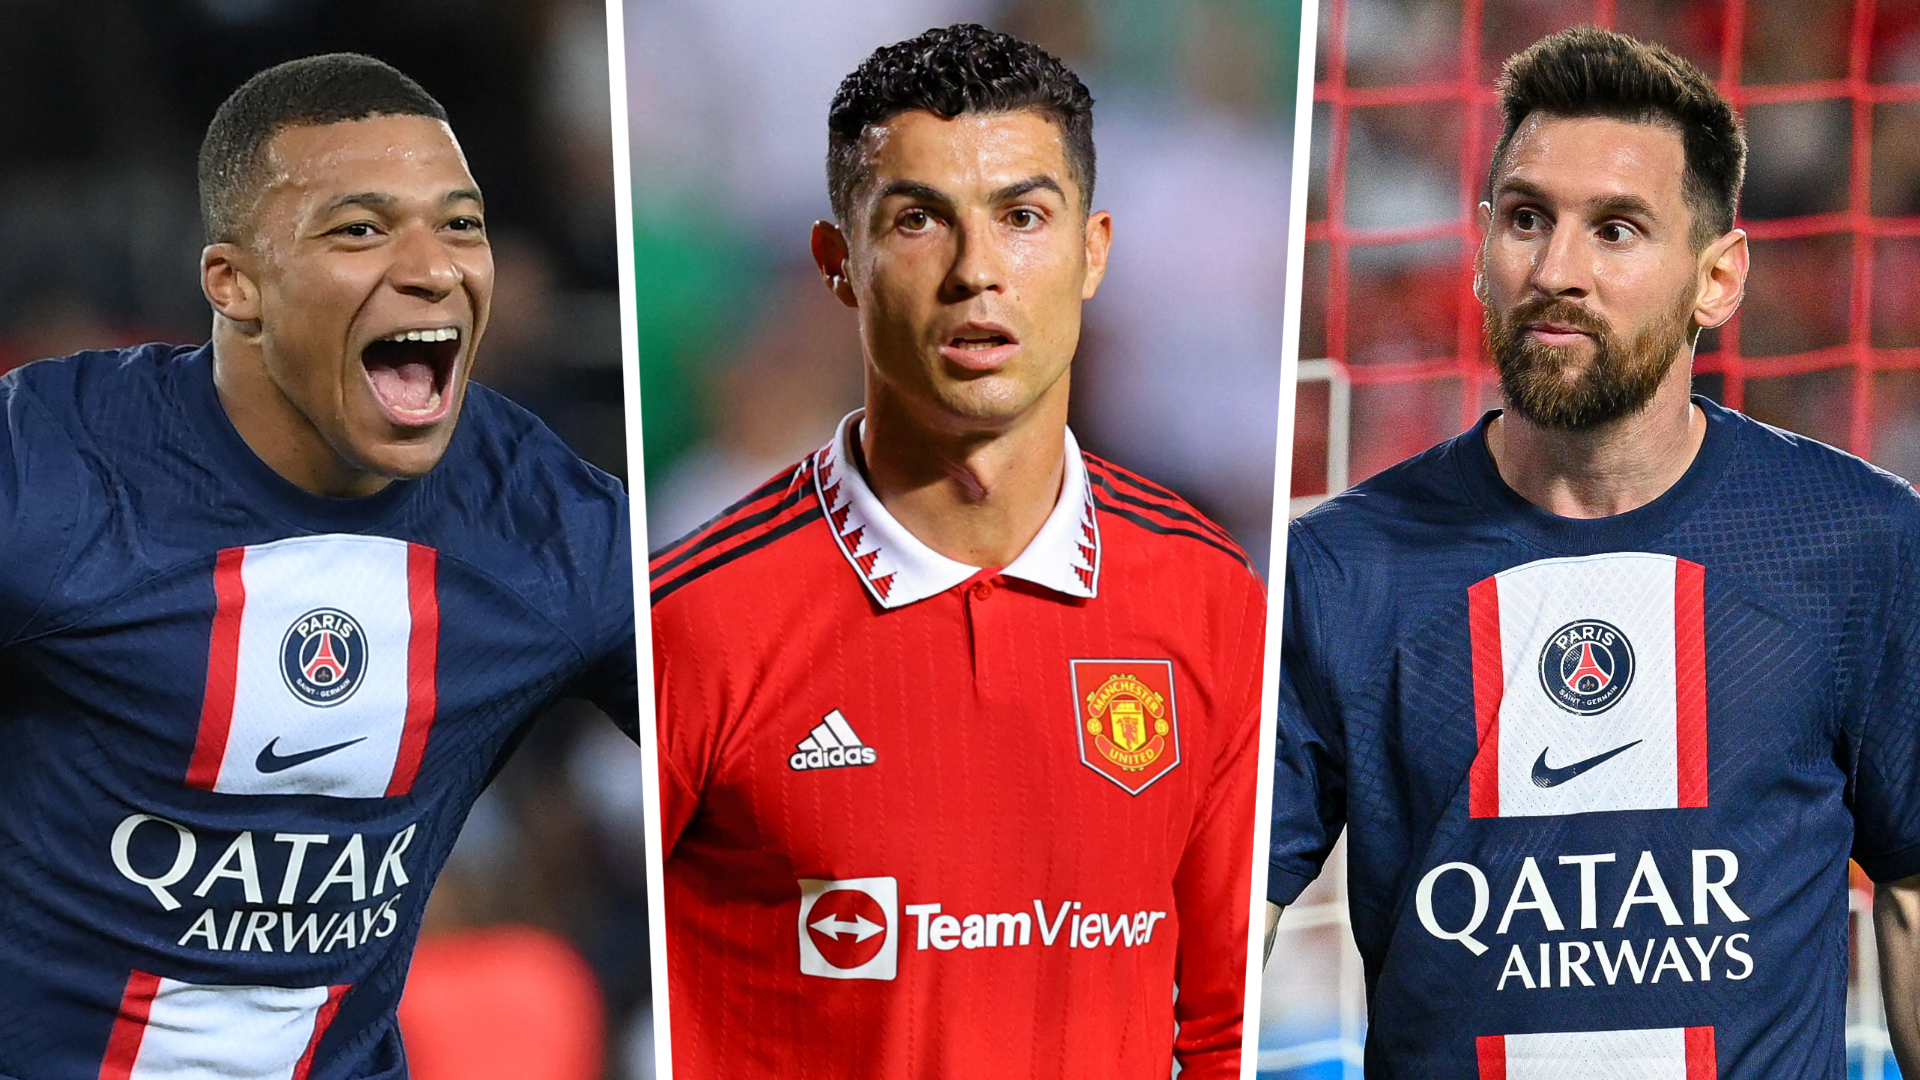 Highest football salary: Know what Messi, Cristiano, Mbappe earn